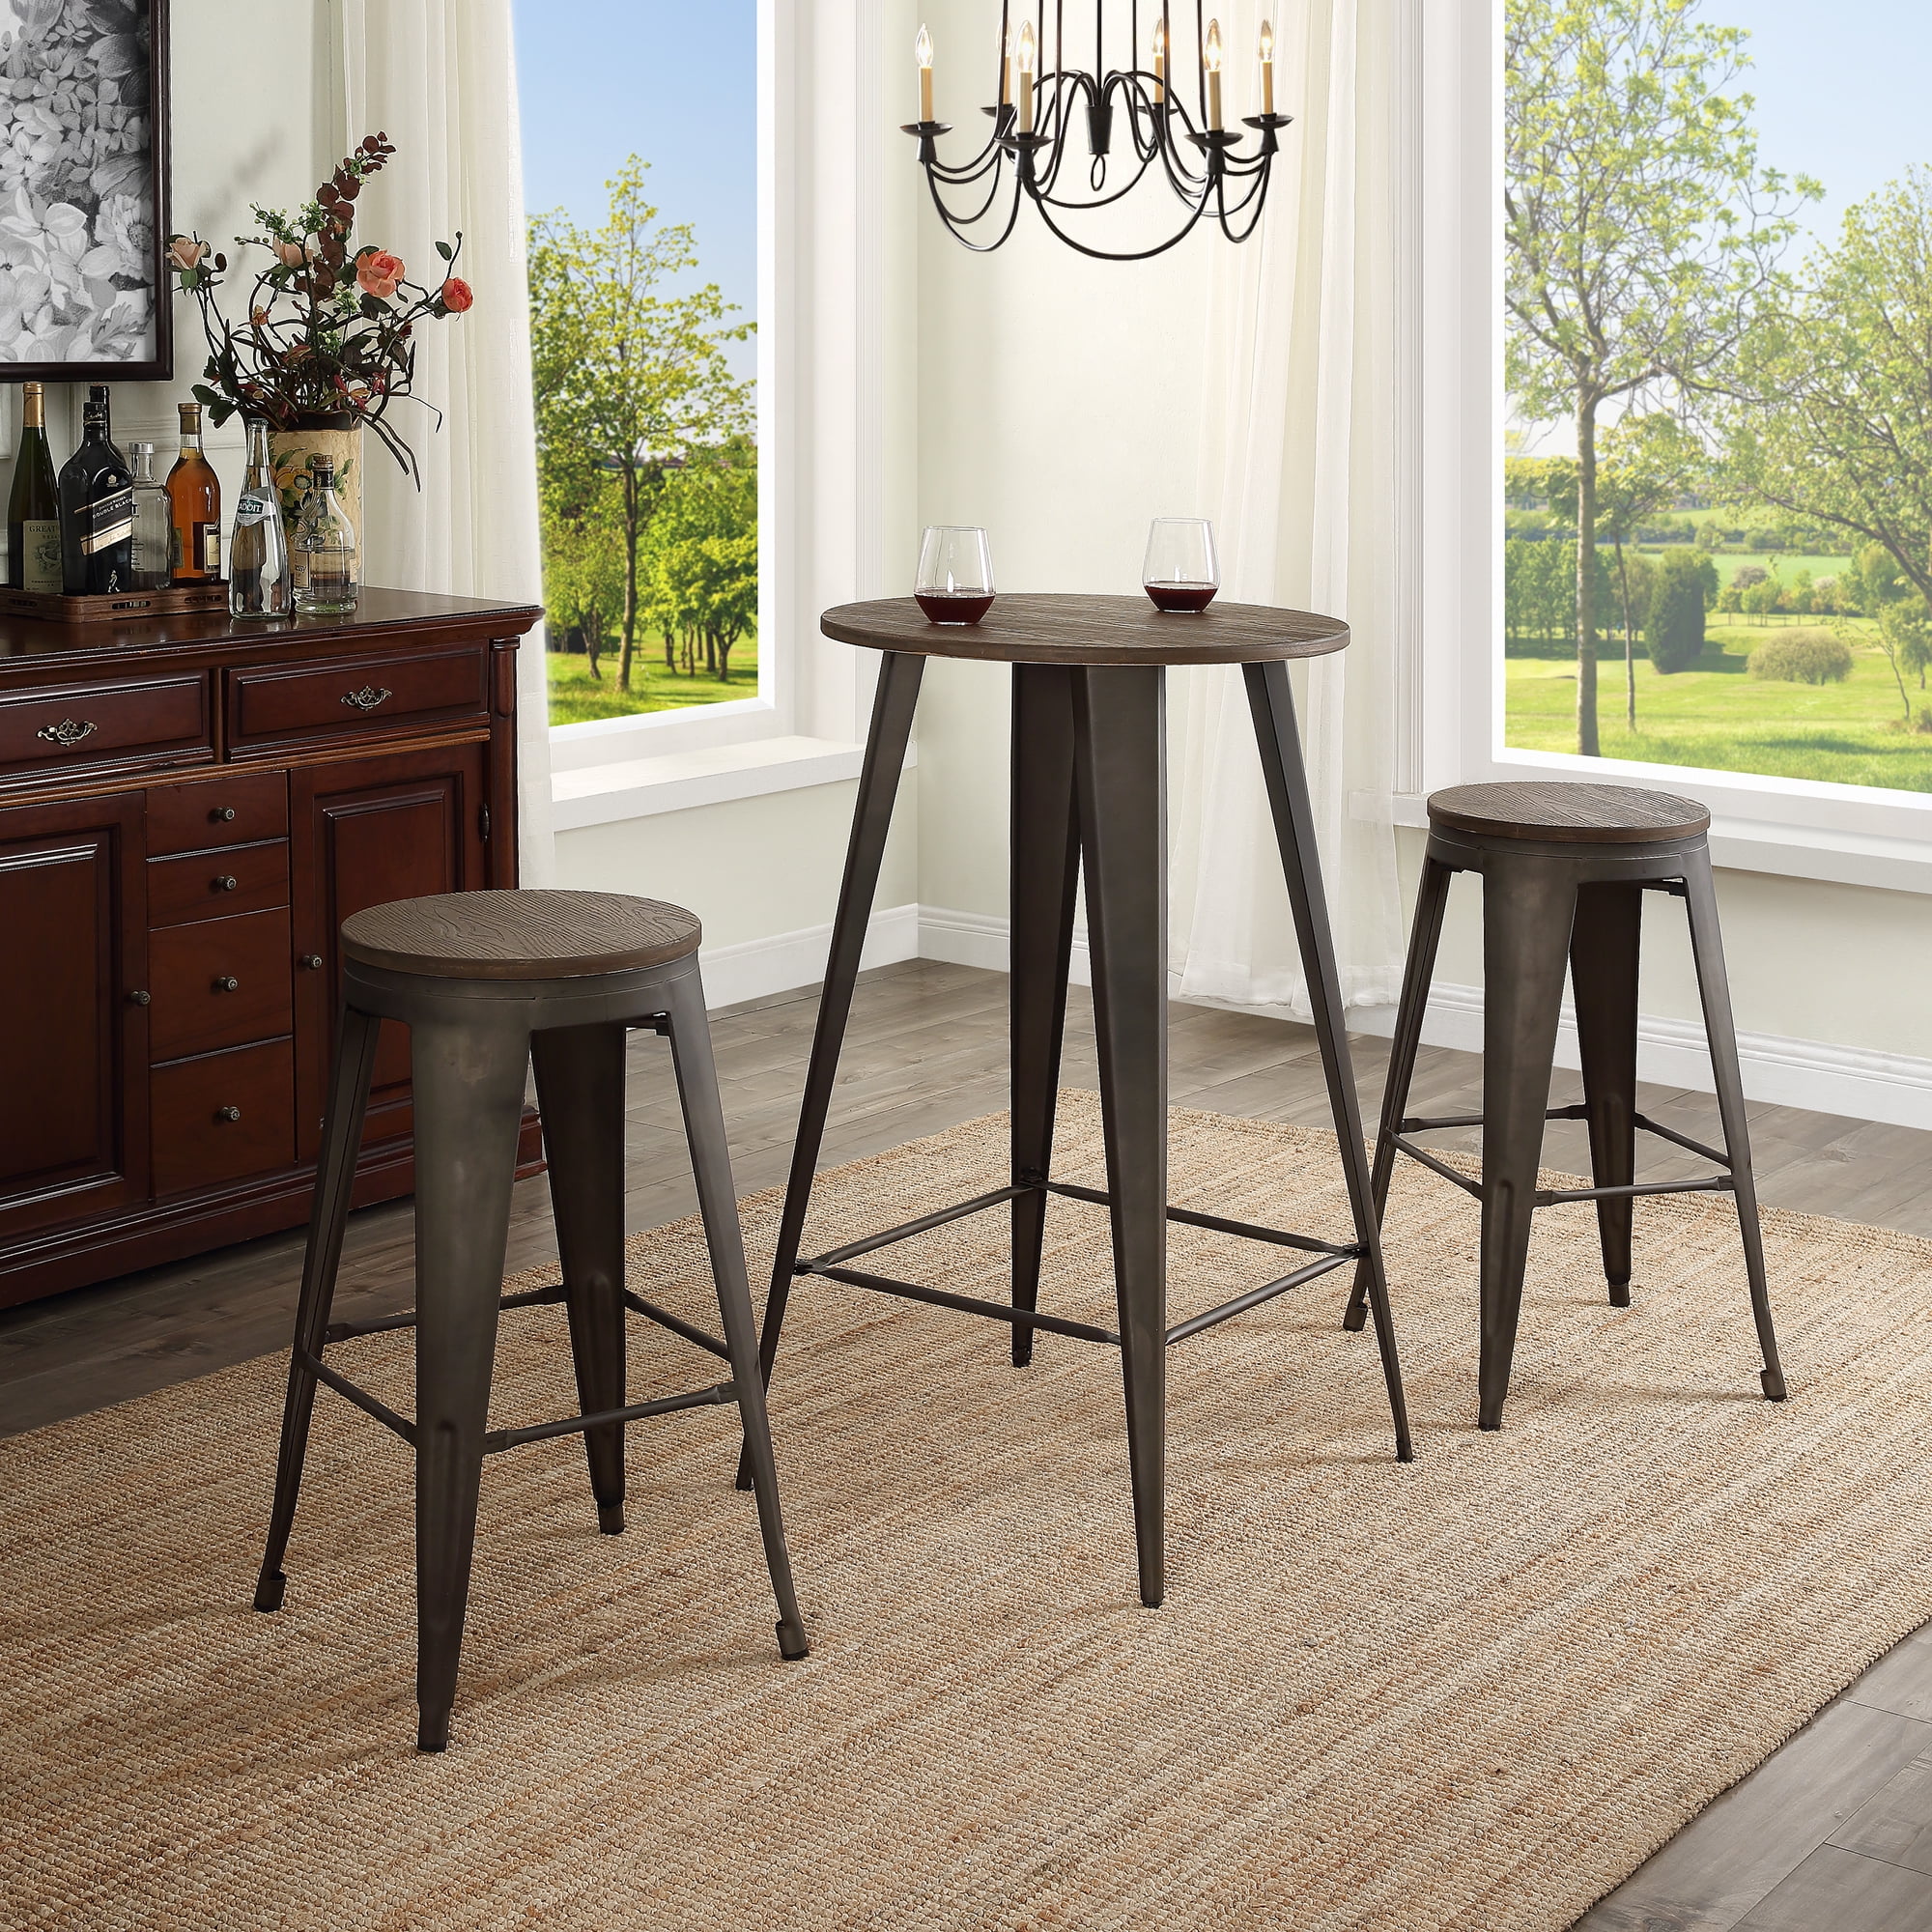 3 Piece Dining Set Pub Style, Round Dining Table Bar Height